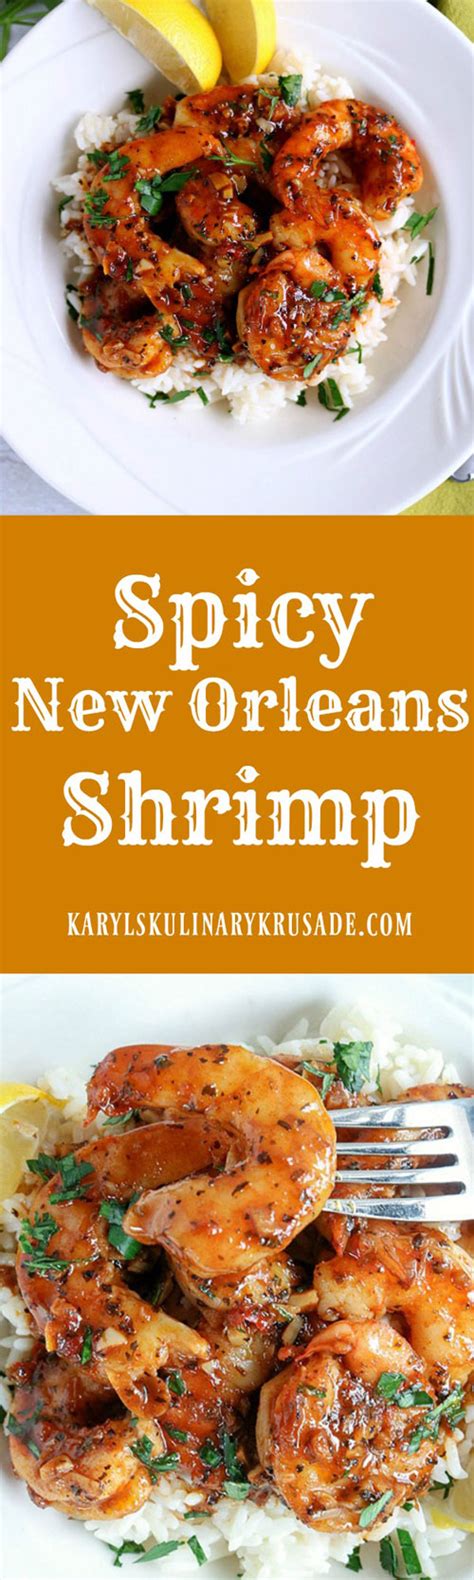 Bbq shrimp done new orleans style in a spicy, buttery, lemony sauce that is so good that you will be licking your fingers and the plate clean! Spicy New Orleans Shrimp by Karyl's Kulinary Krusade